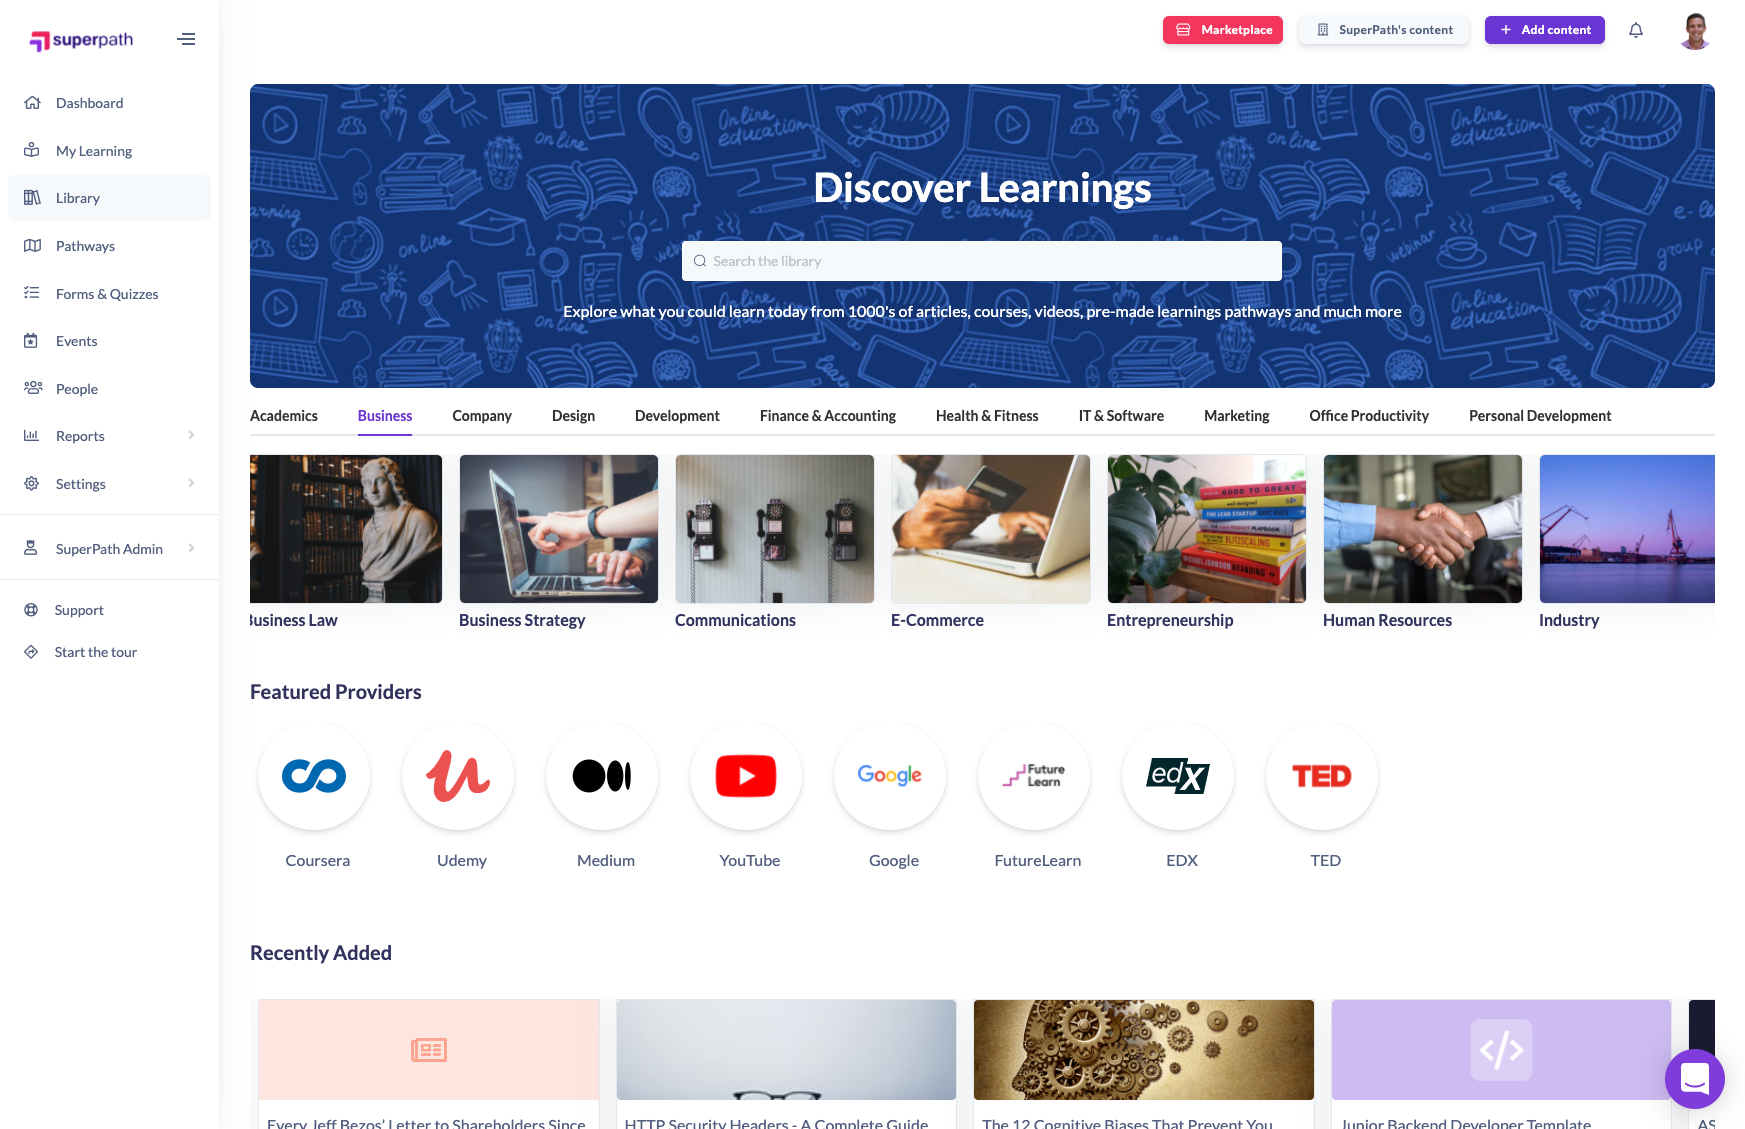 Learning library with out of the box learning content and pre-built learning pathway templates